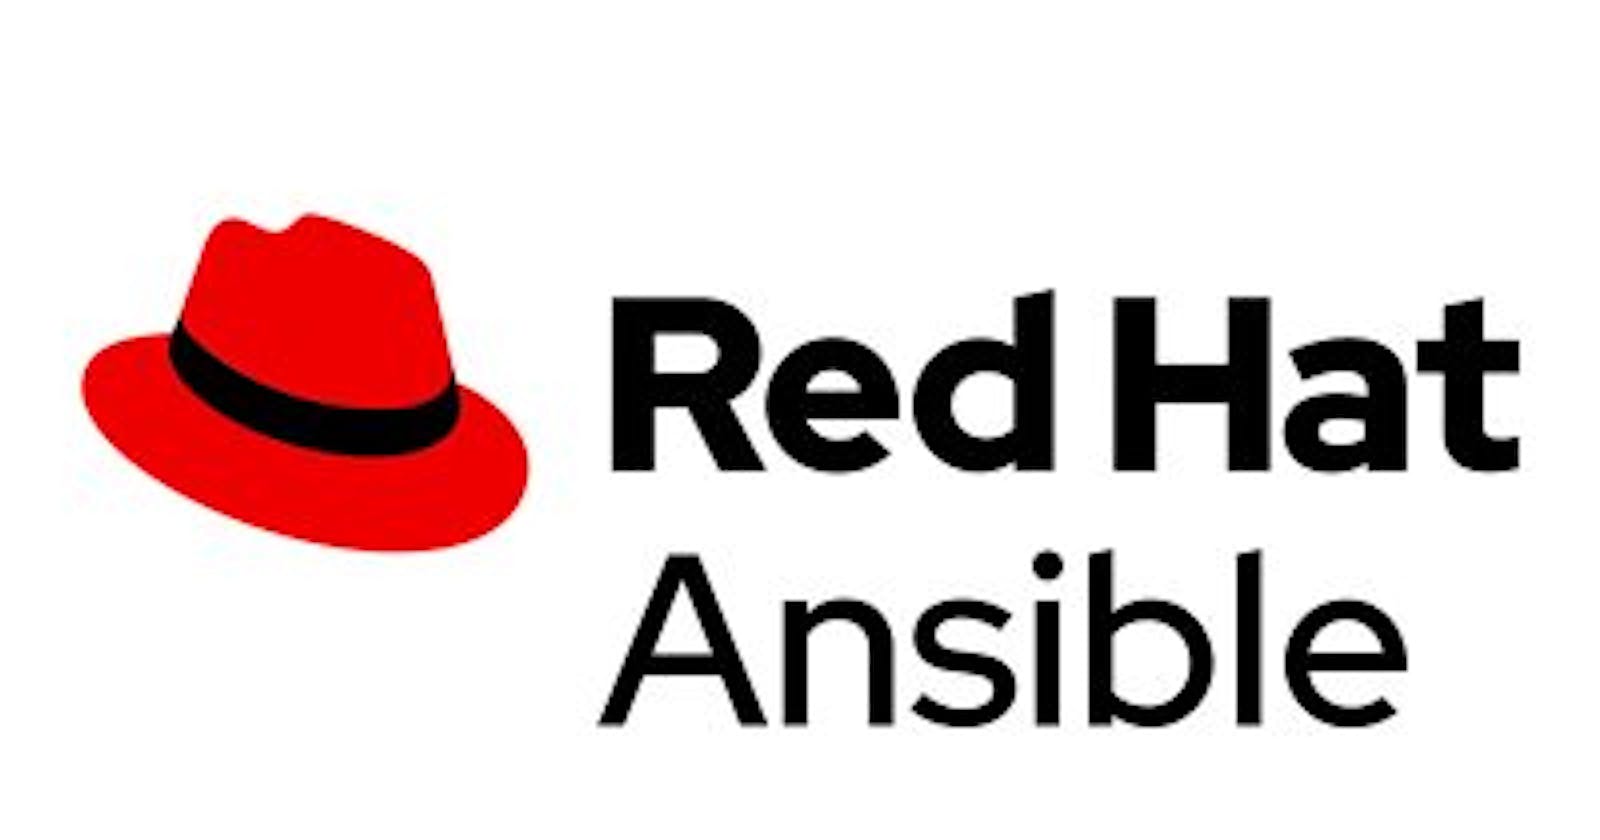 Install Ansible on Red Hat Linux